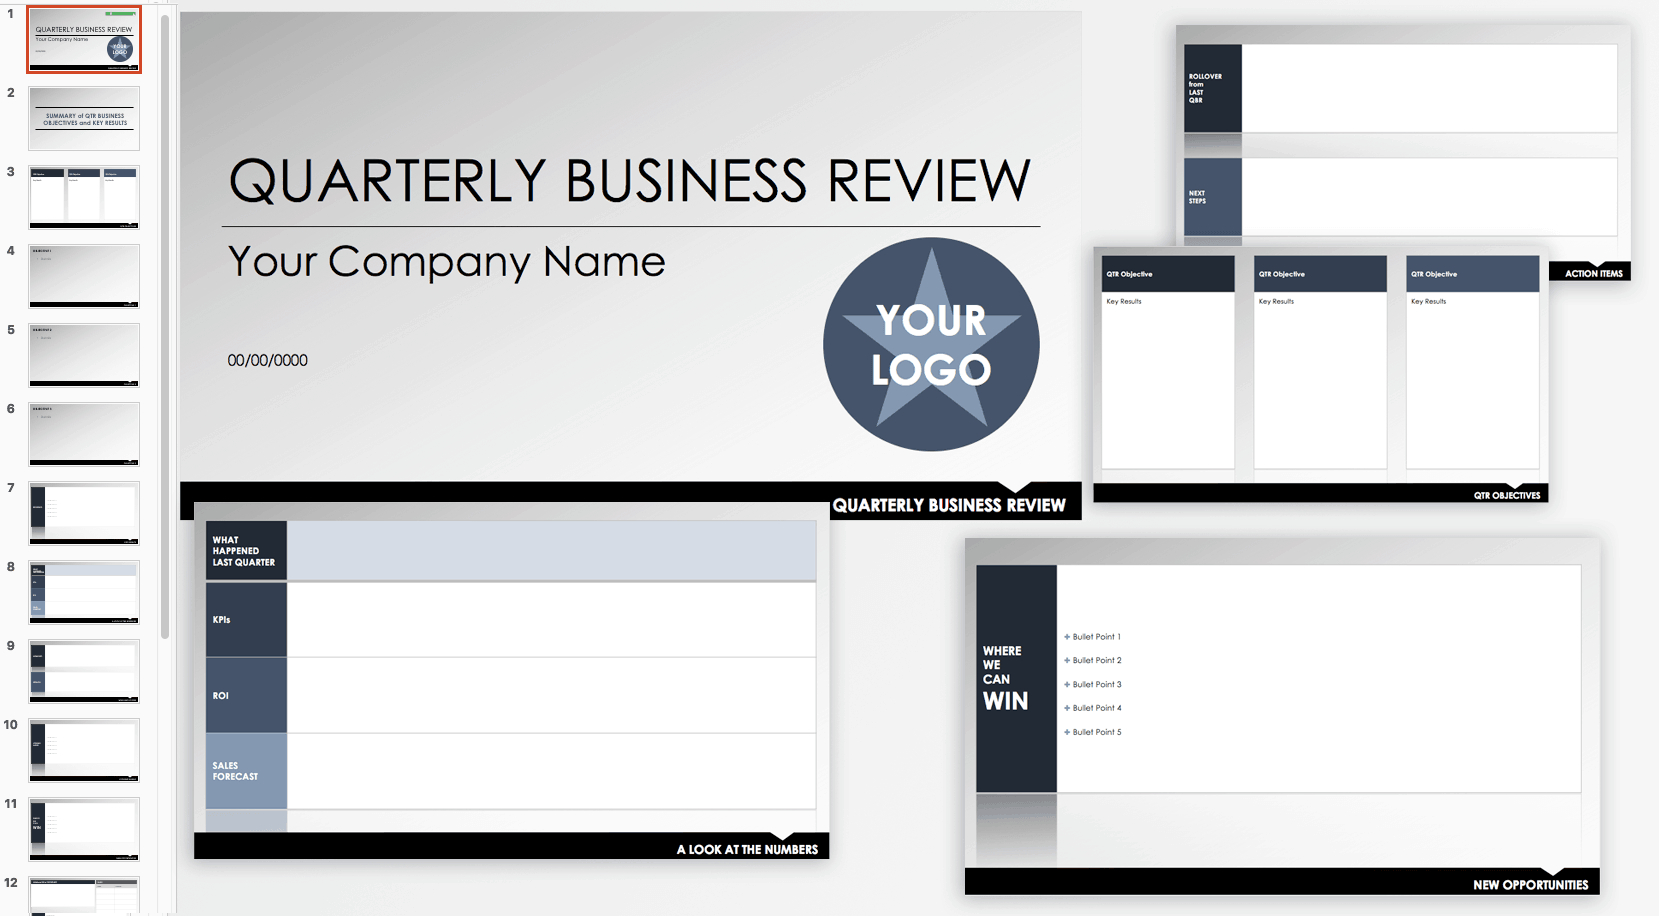 Free Qbr And Business Review Templates | Smartsheet Throughout Business Review Report Template